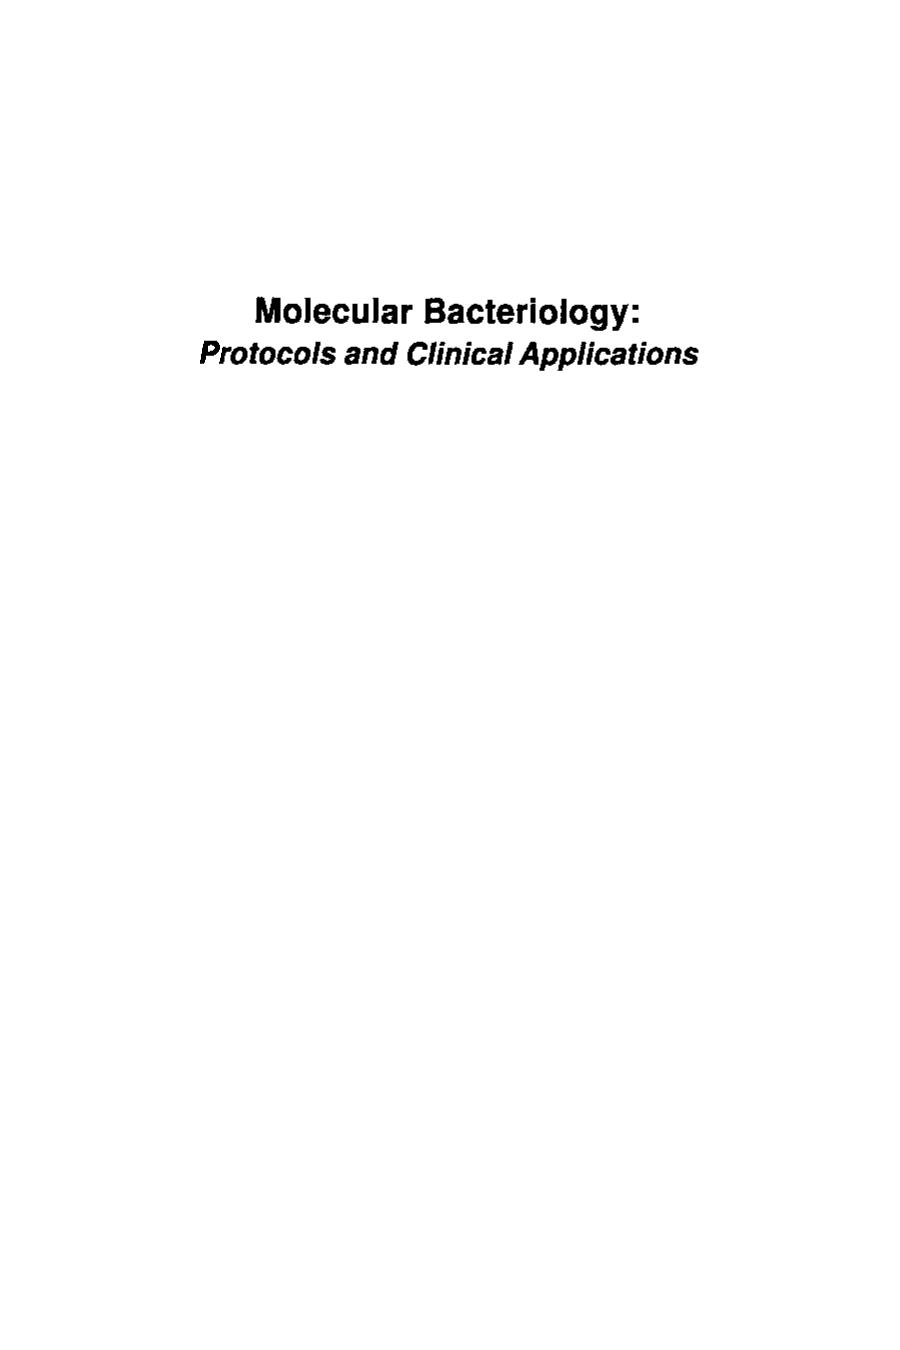 Molecular bacteriology : protocols and clinical applications